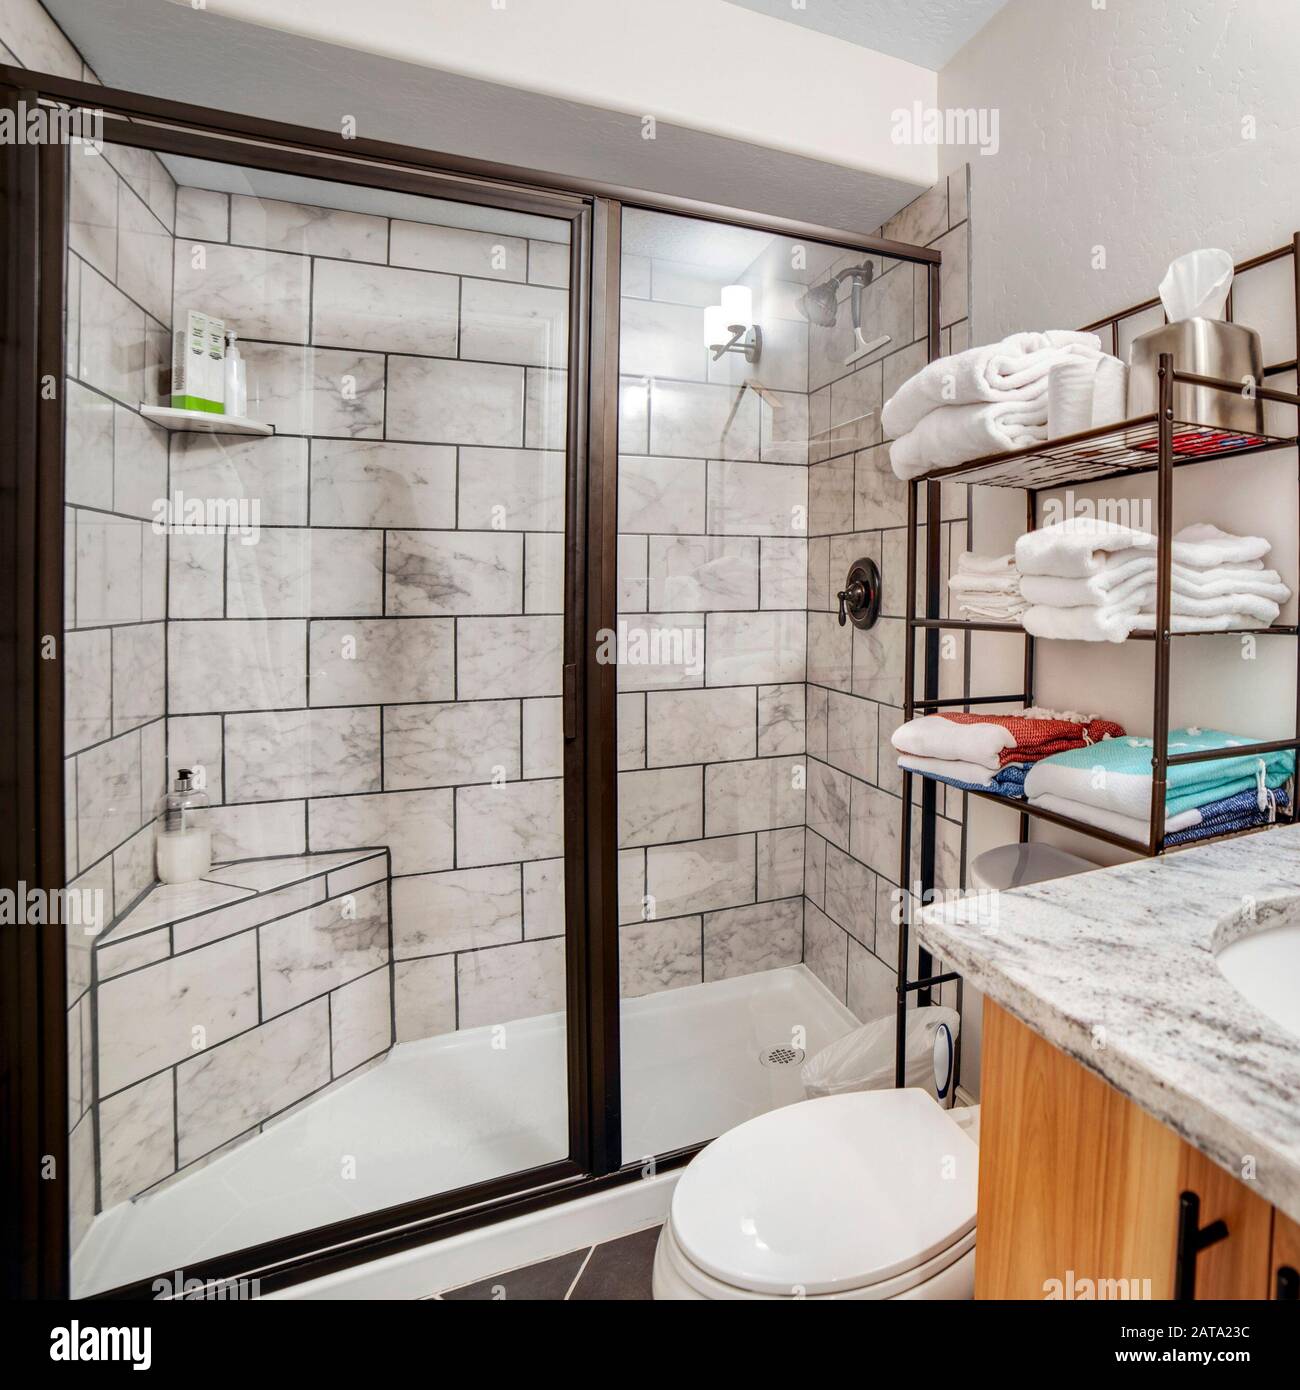 Square Frame Bathroom Interior With Black And White Tile Wall And